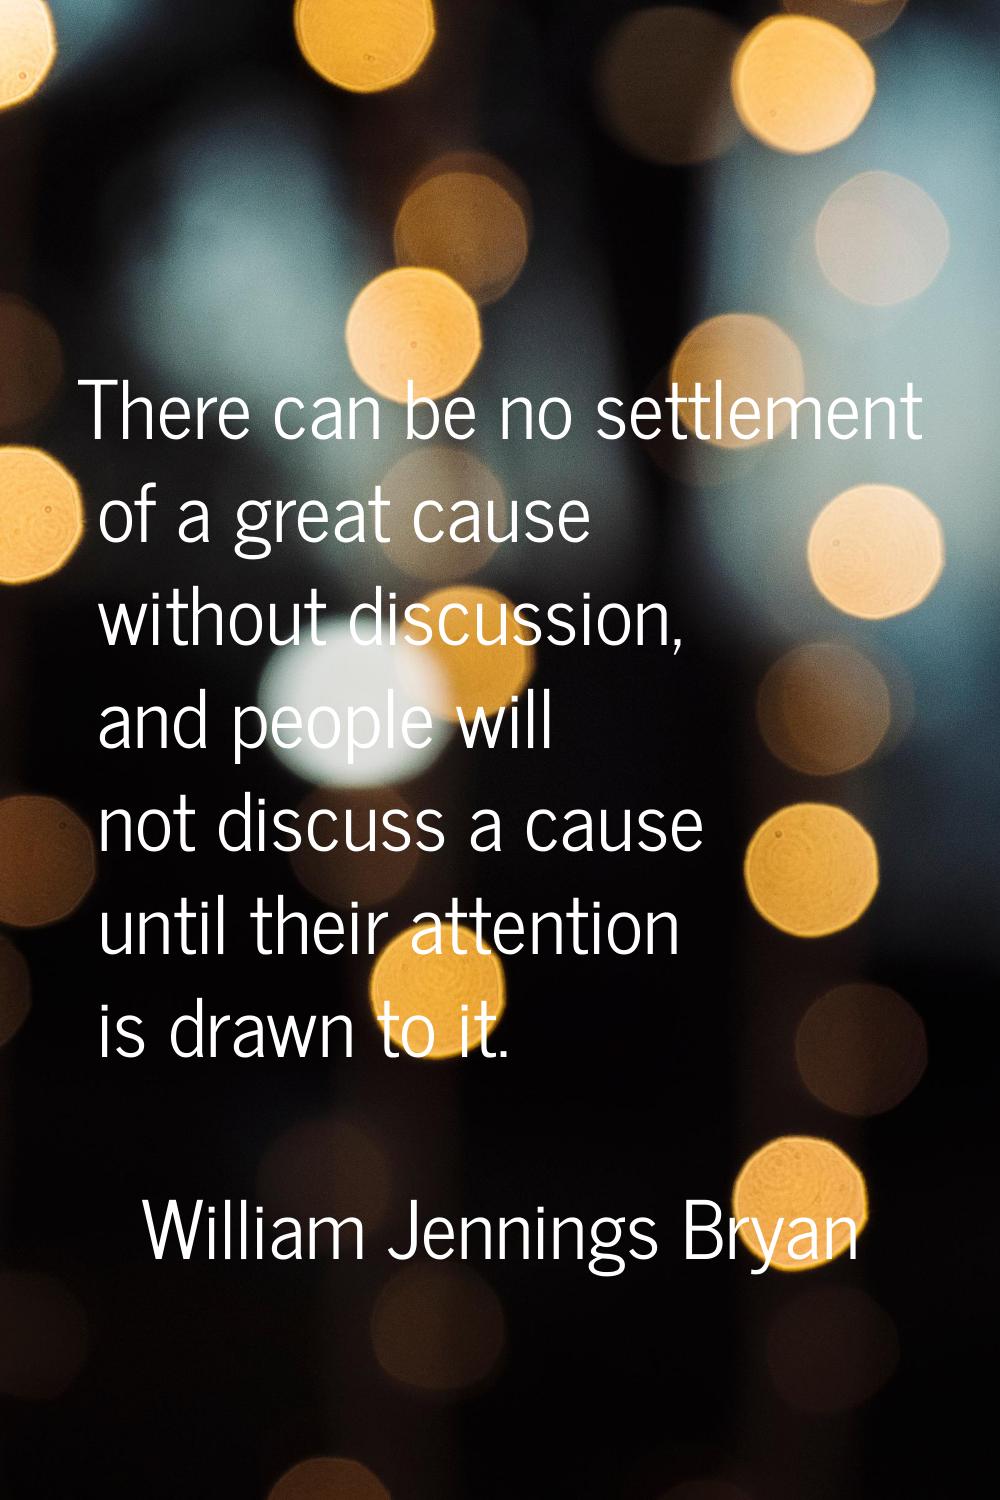 There can be no settlement of a great cause without discussion, and people will not discuss a cause